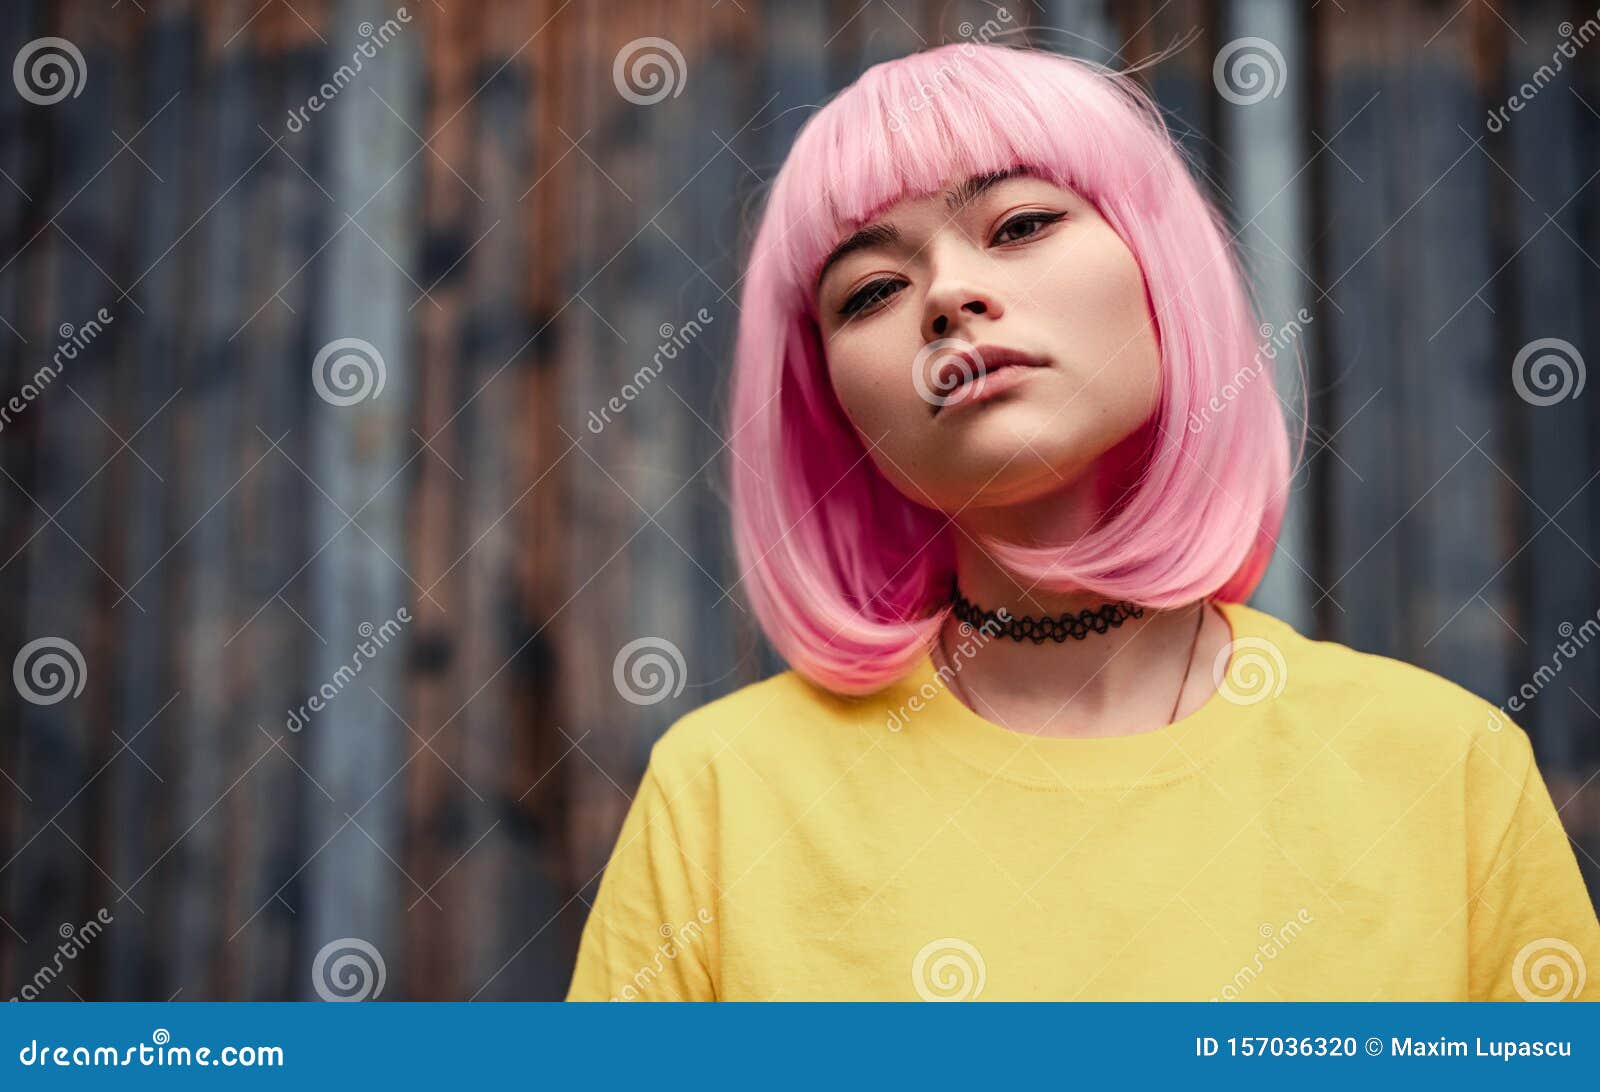 Pensive Asian Woman With Pink Hair Stock Photo Image Of Homelanders Adolescent 157036320